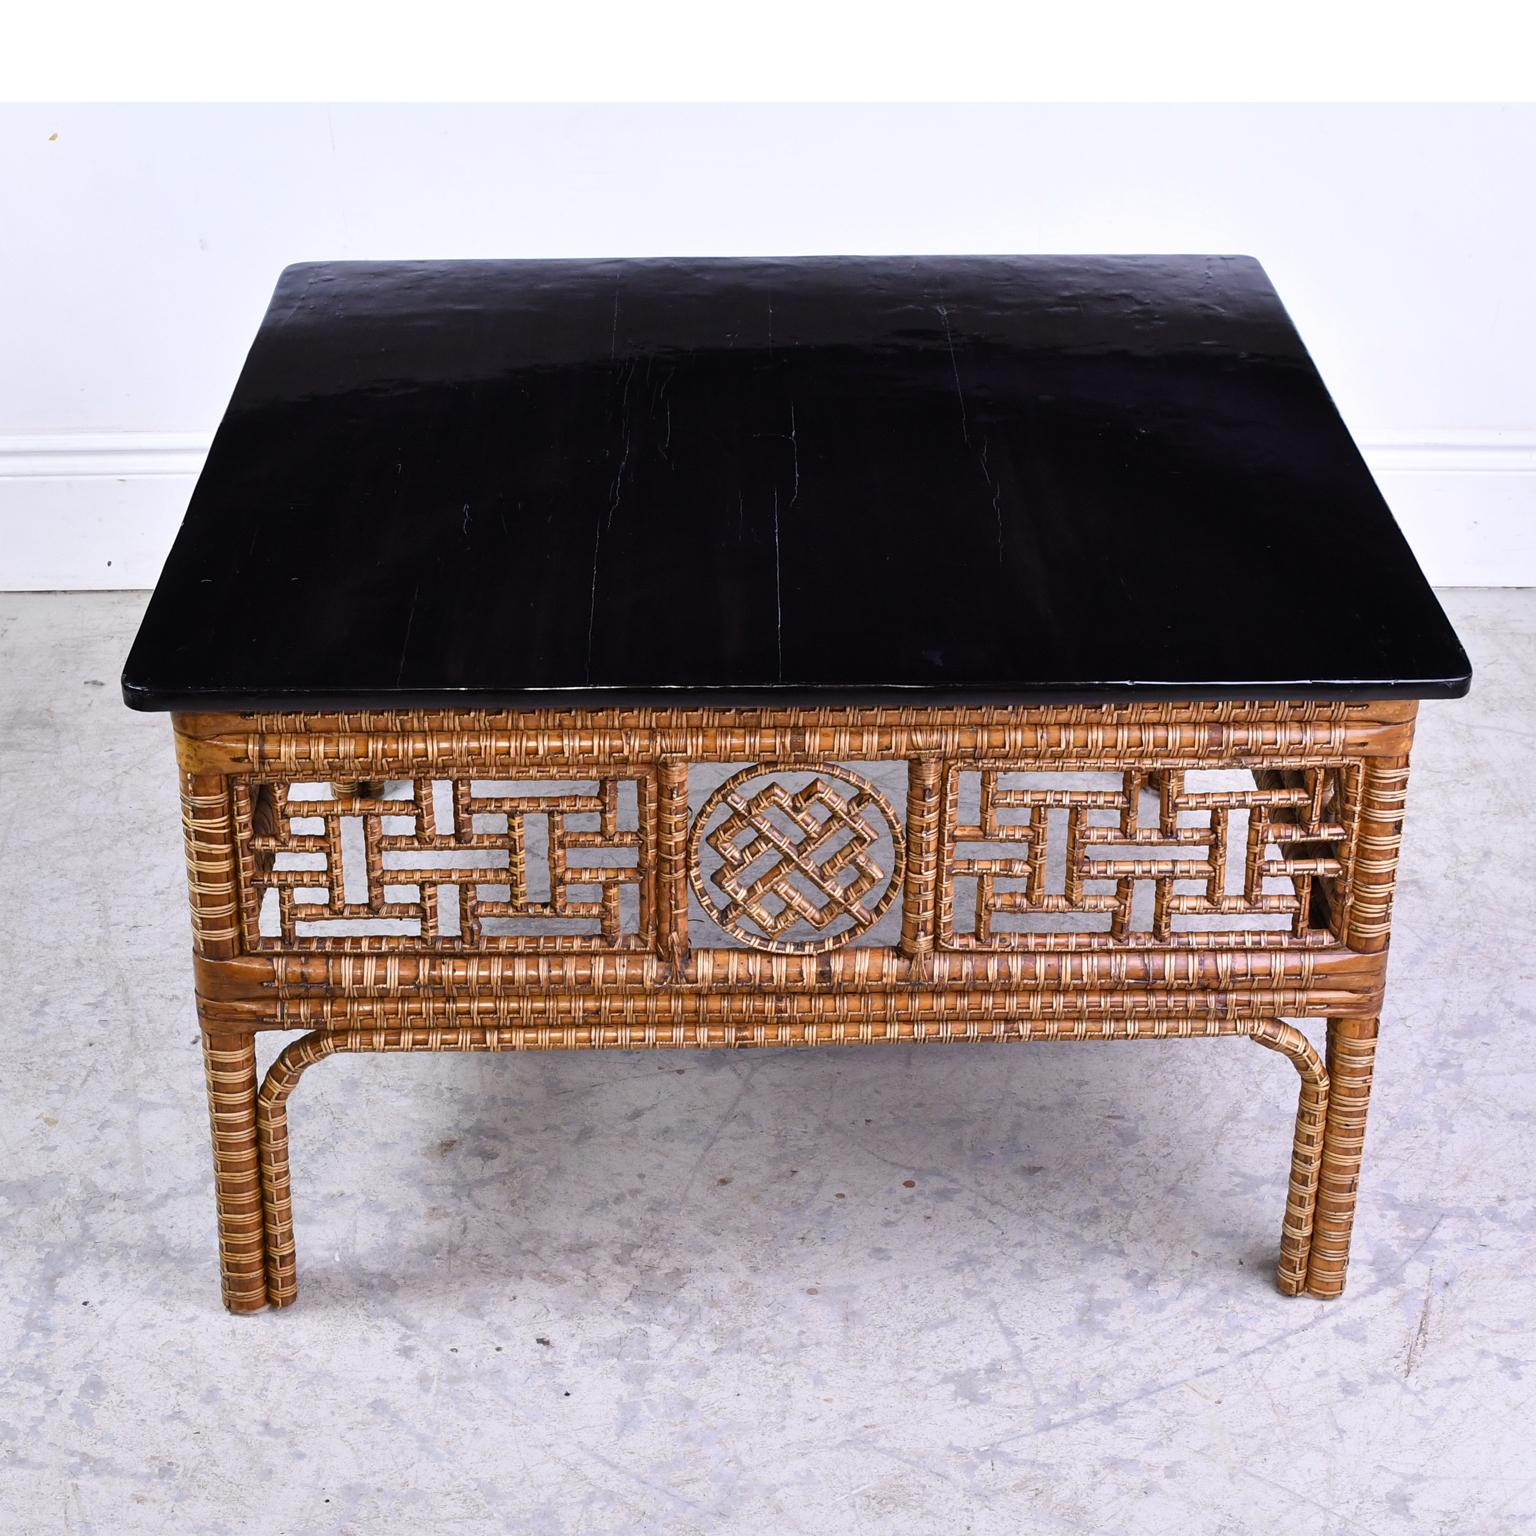 An exquisite Chinese table with square black-lacquered top over an intricately woven bamboo frame with four legs and an open geometric design on the apron. China, circa 1850.
Measures: 38